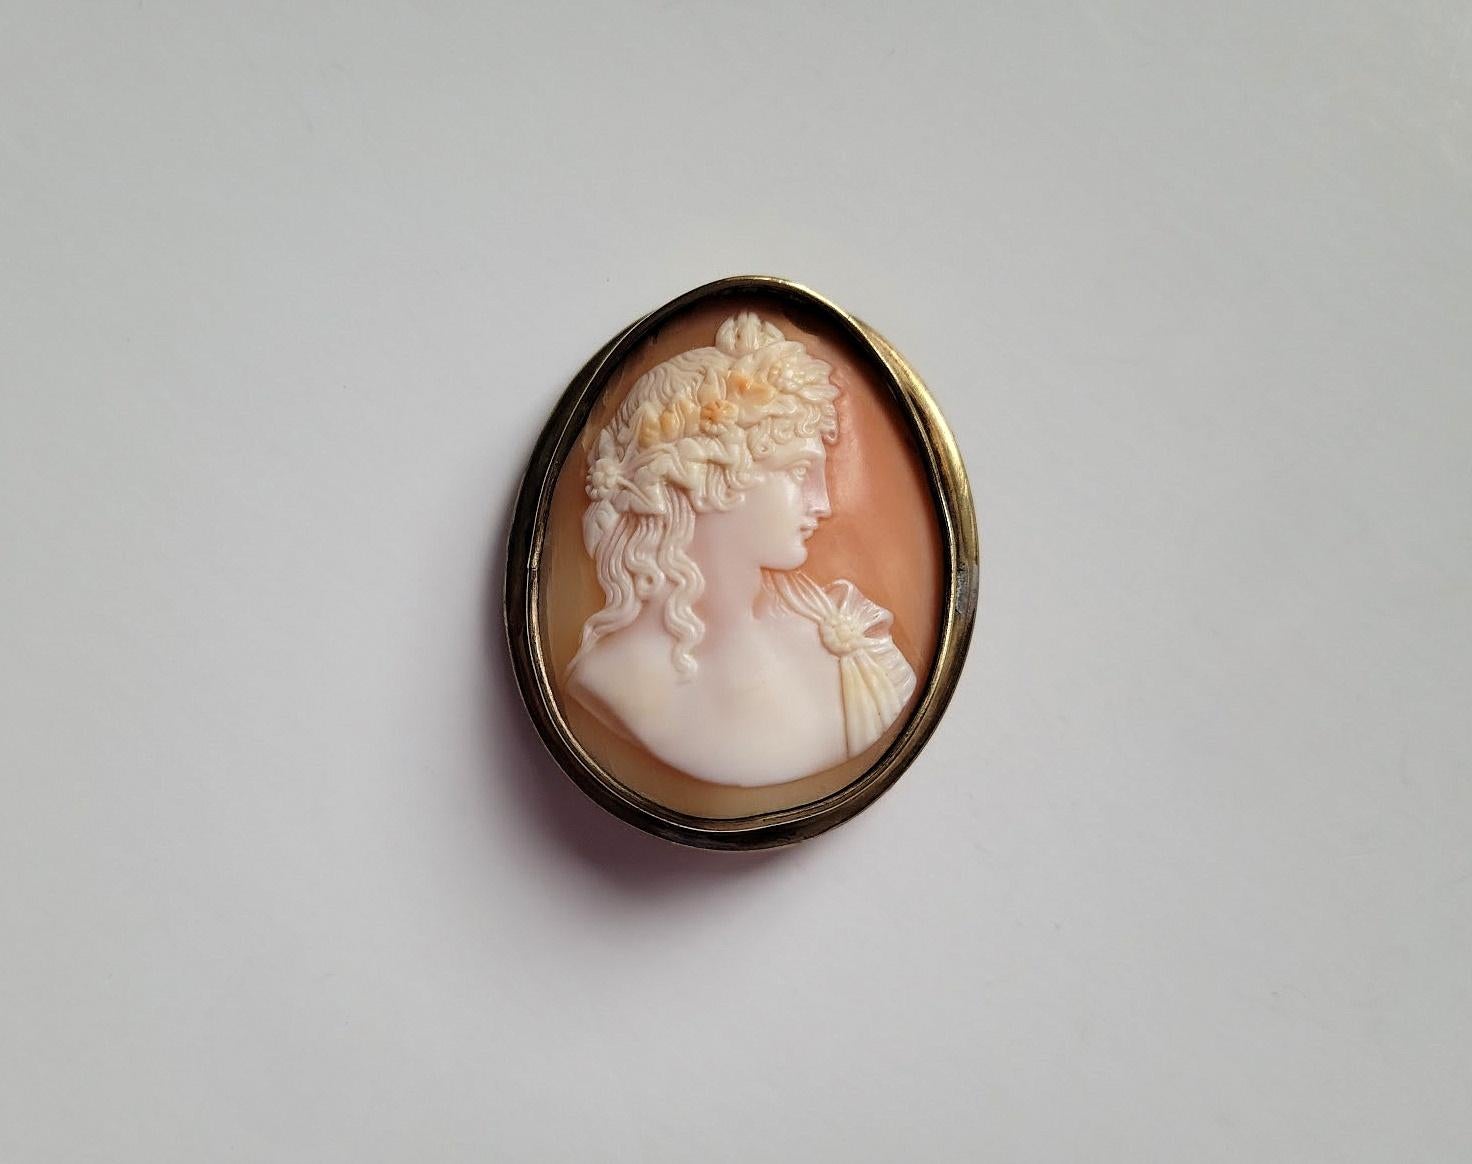 Antique sardonyx shell cameo circa 1870. The subject is Antinous, the favorite of Emperor Hadrian, a handsome youth who was idealized as an example of perfect male beauty. He is depicted in profile with a pine cone, the symbol of fertility, and